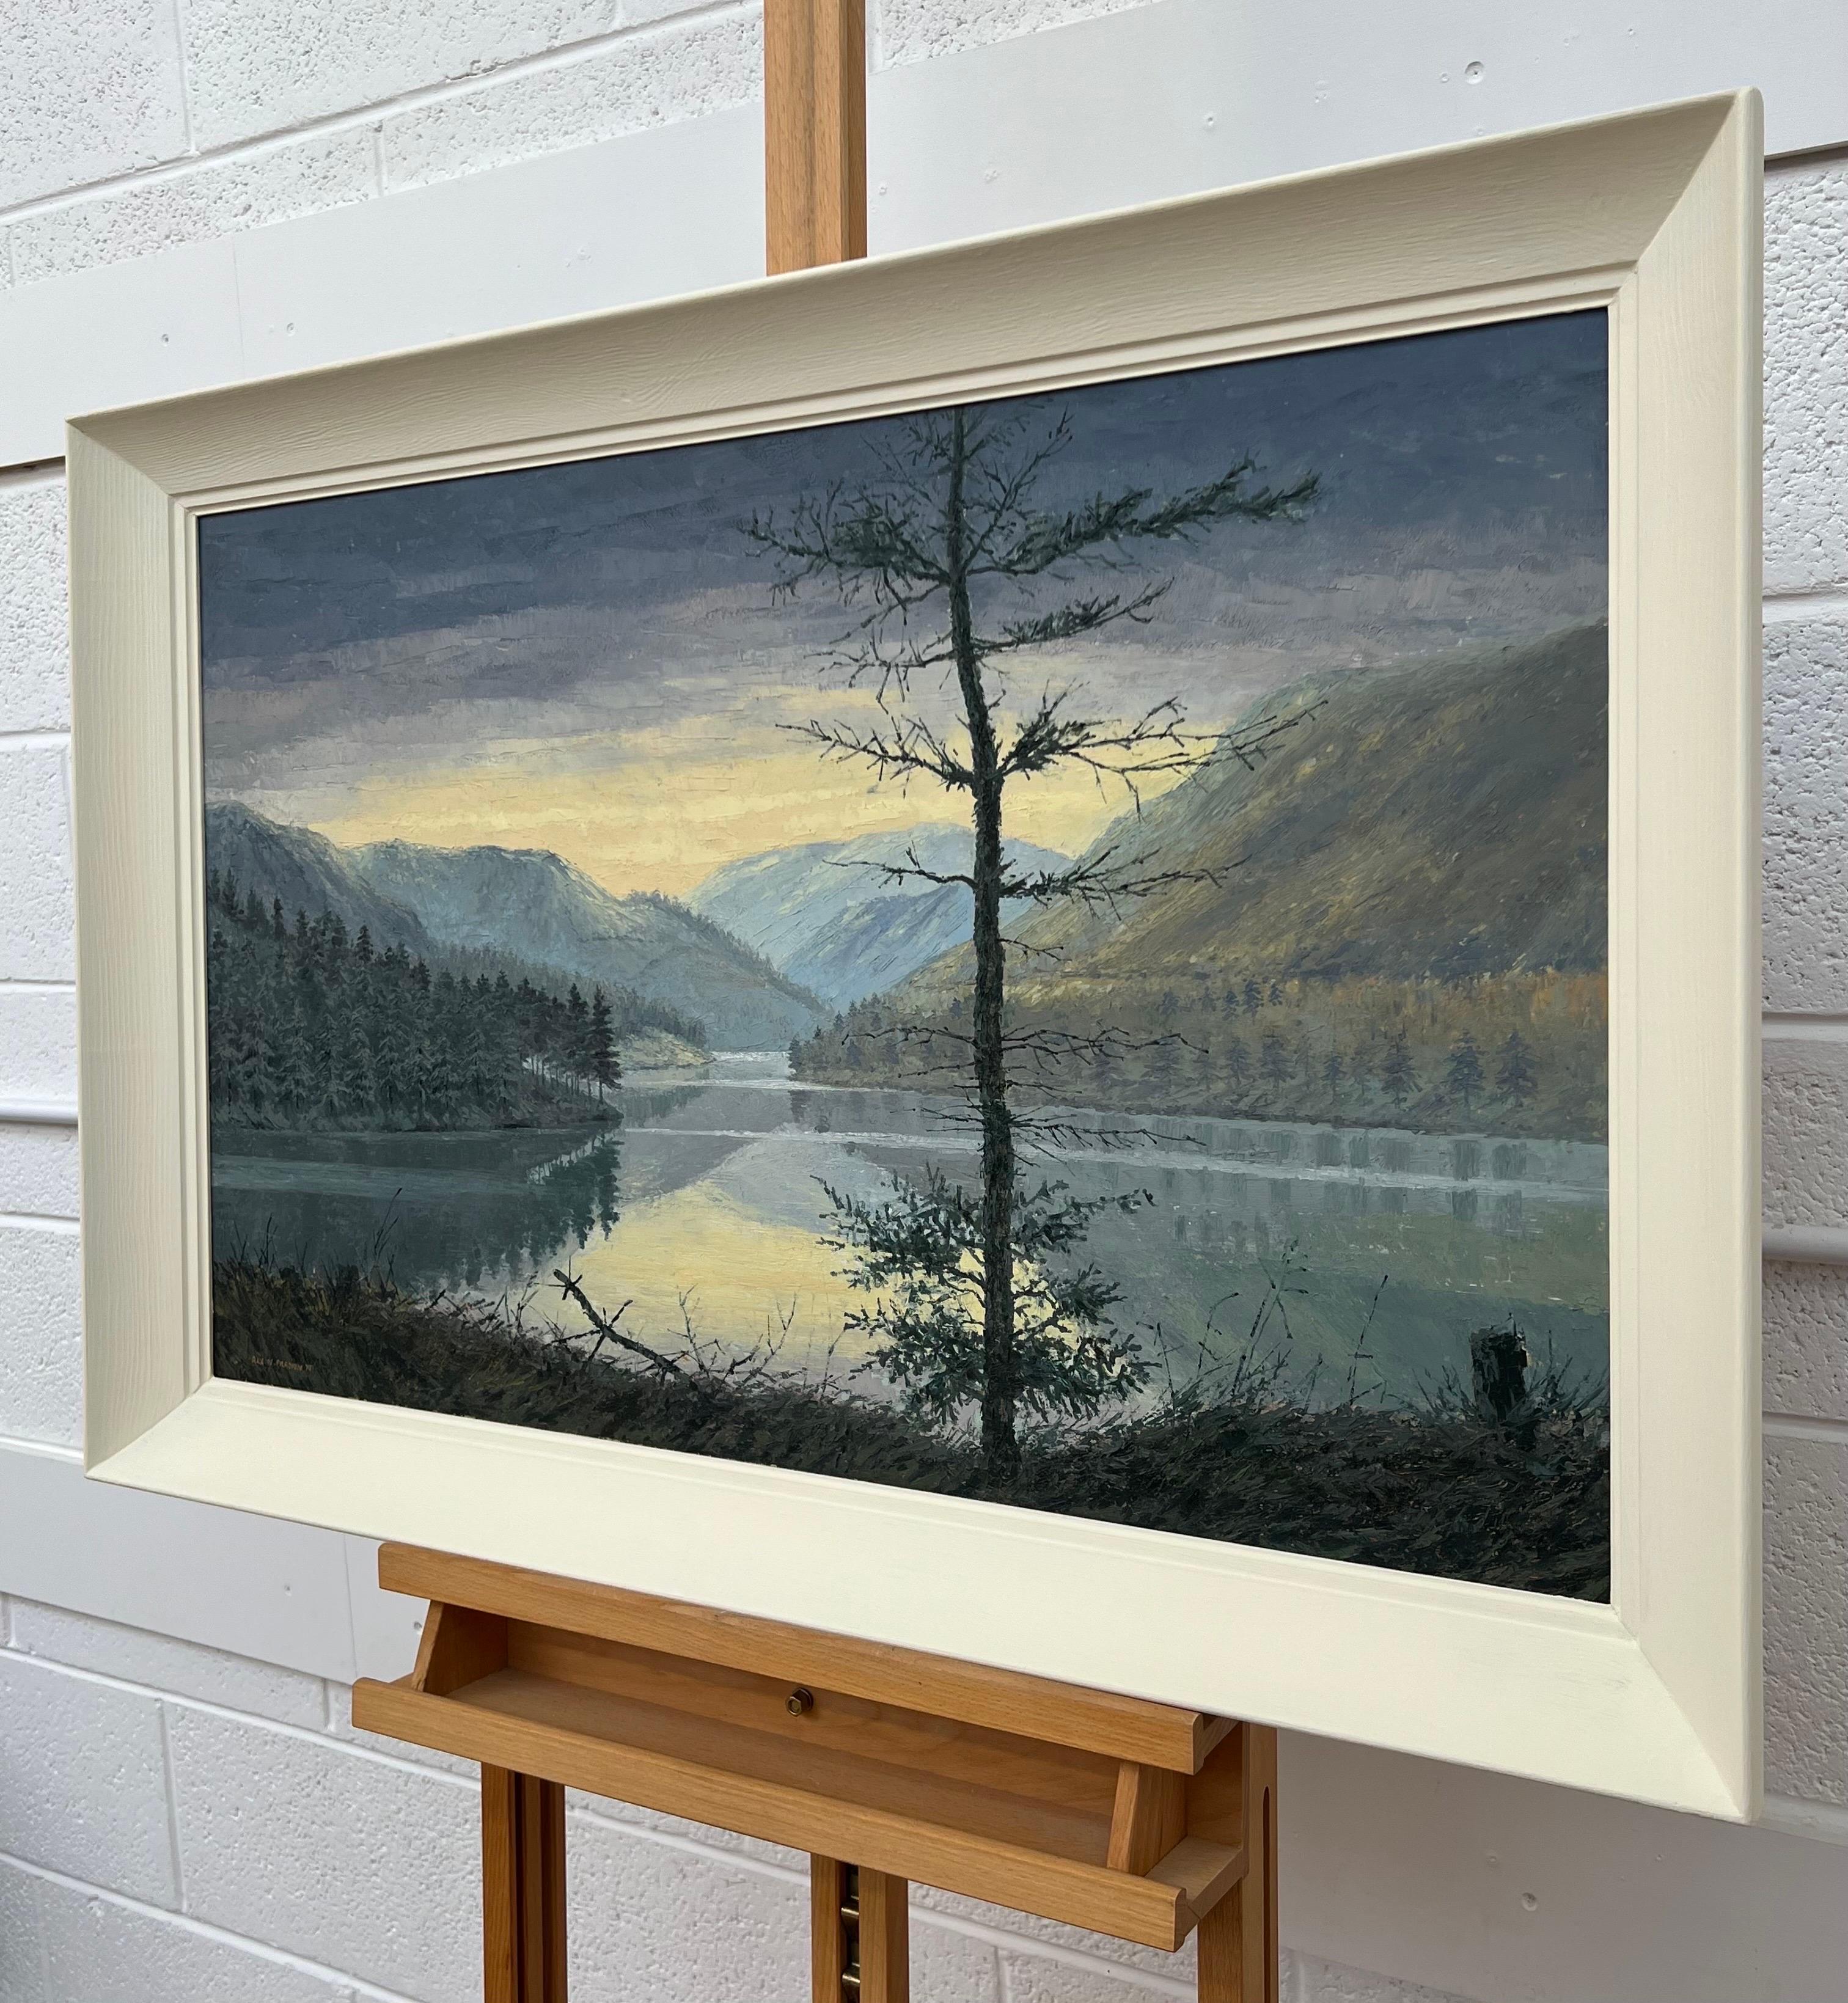 Vintage Impasto Impressionist Winter Landscape Painting of a Misty Morning at a Reservoir in the Peak District National Park in Northern England, by 20th Century British Artist. 

L'œuvre d'art mesure 33 x 21 pouces
Le cadre mesure 39 x 27